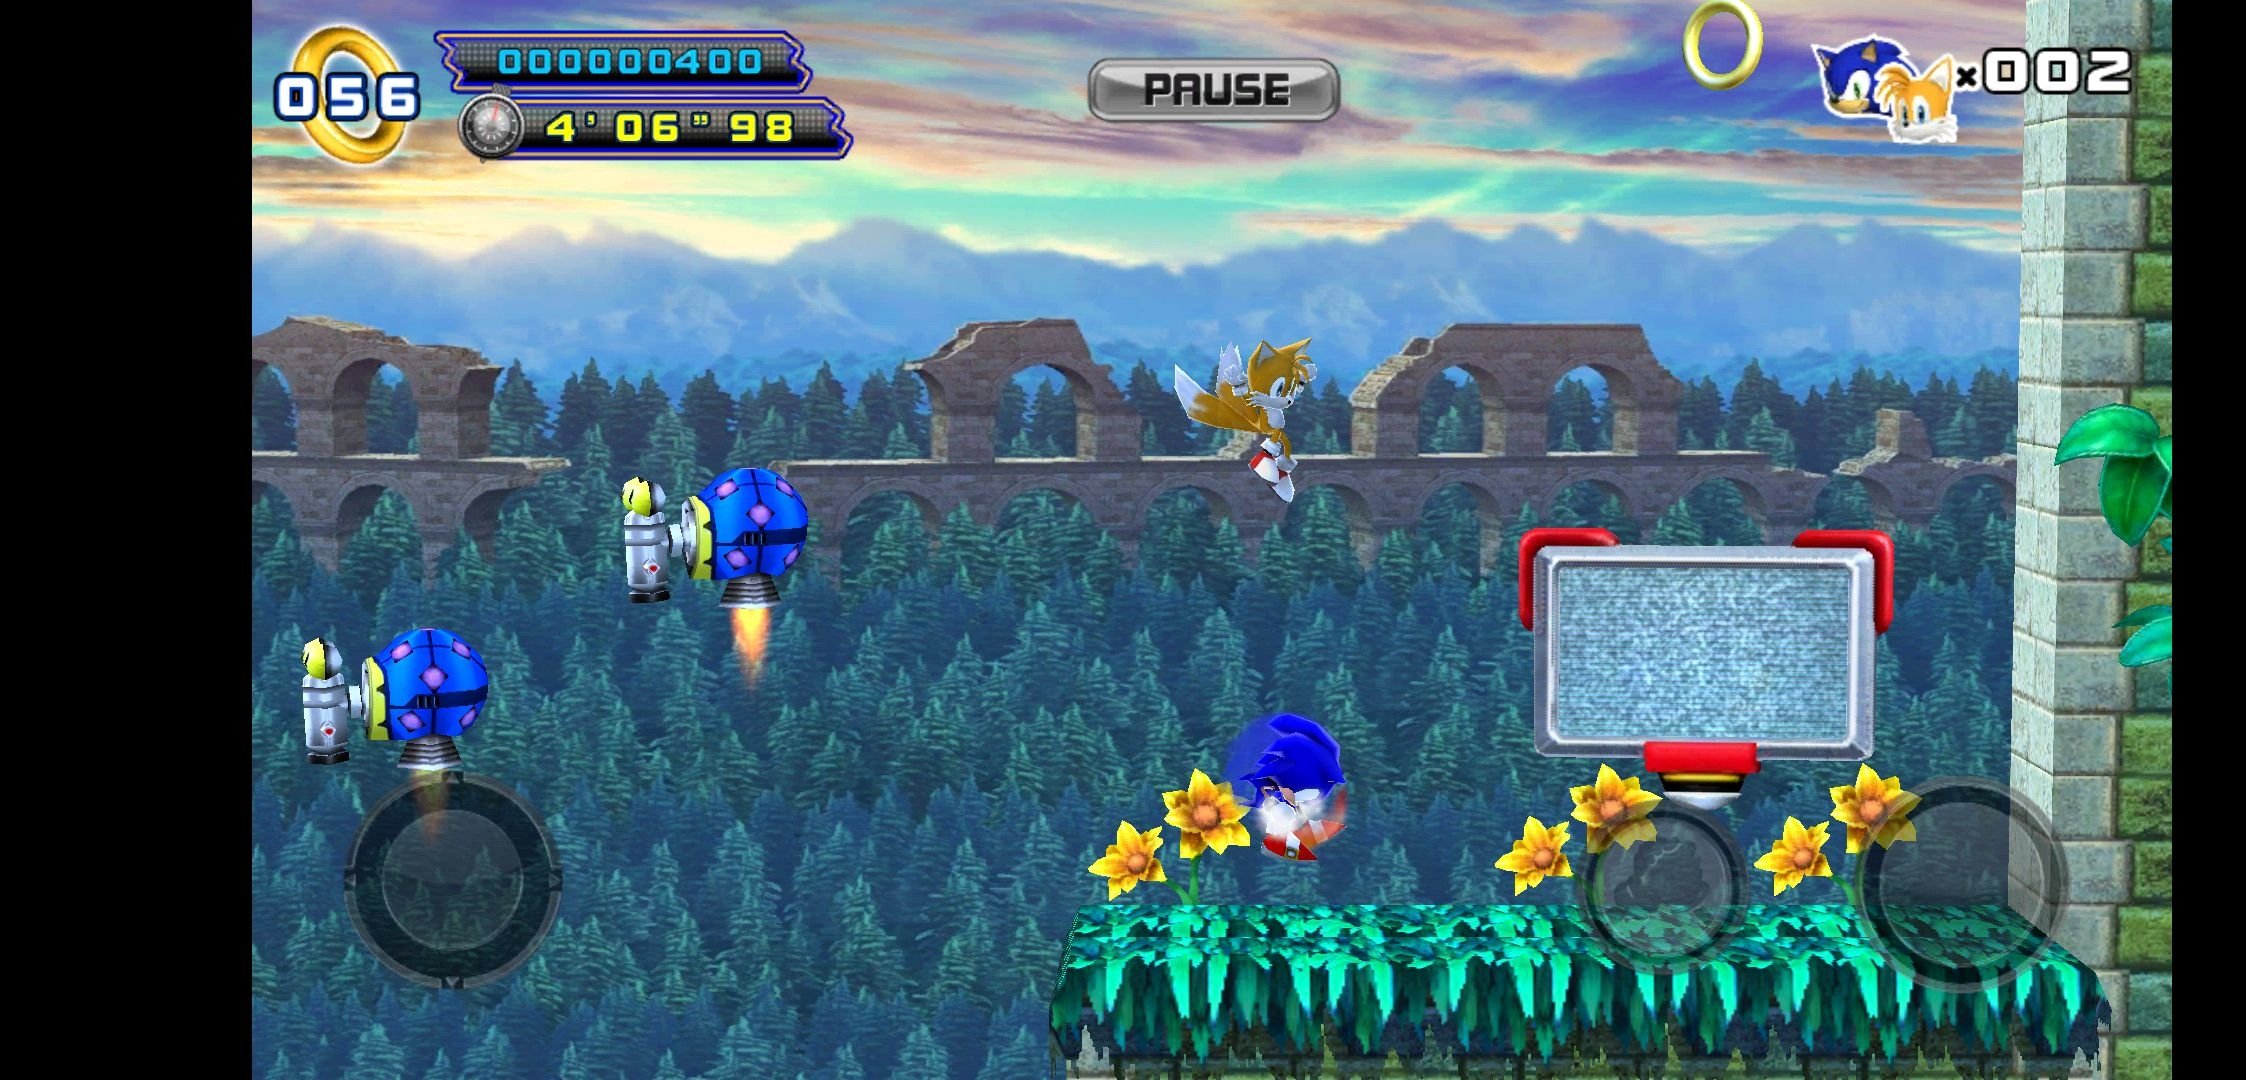 Sonic APK (Android Game) - Free Download